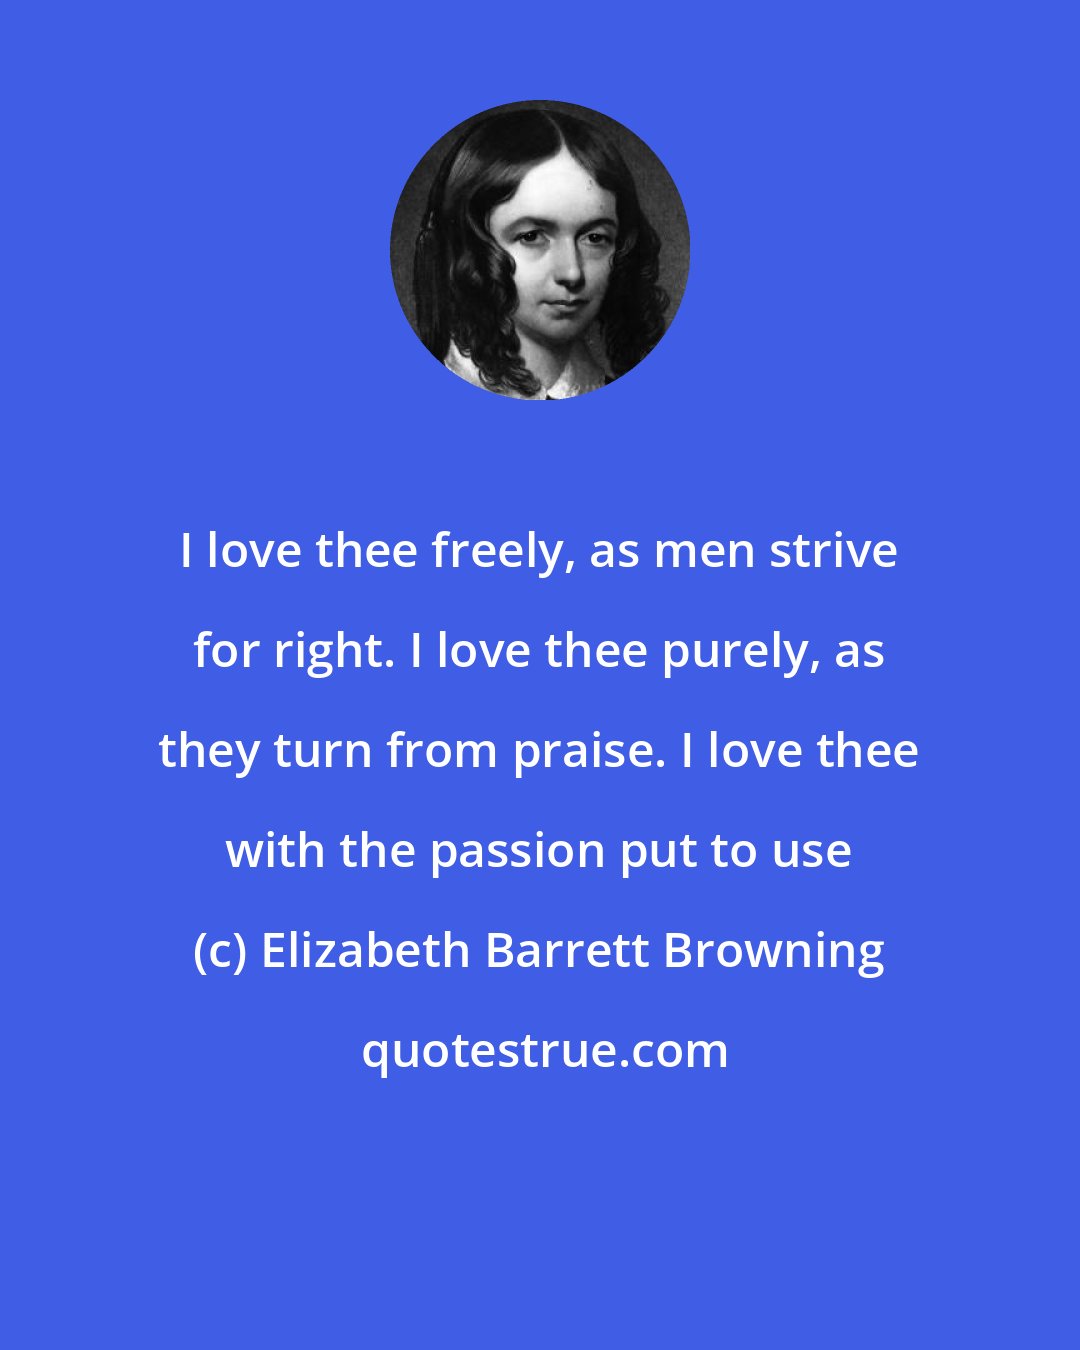 Elizabeth Barrett Browning: I love thee freely, as men strive for right. I love thee purely, as they turn from praise. I love thee with the passion put to use